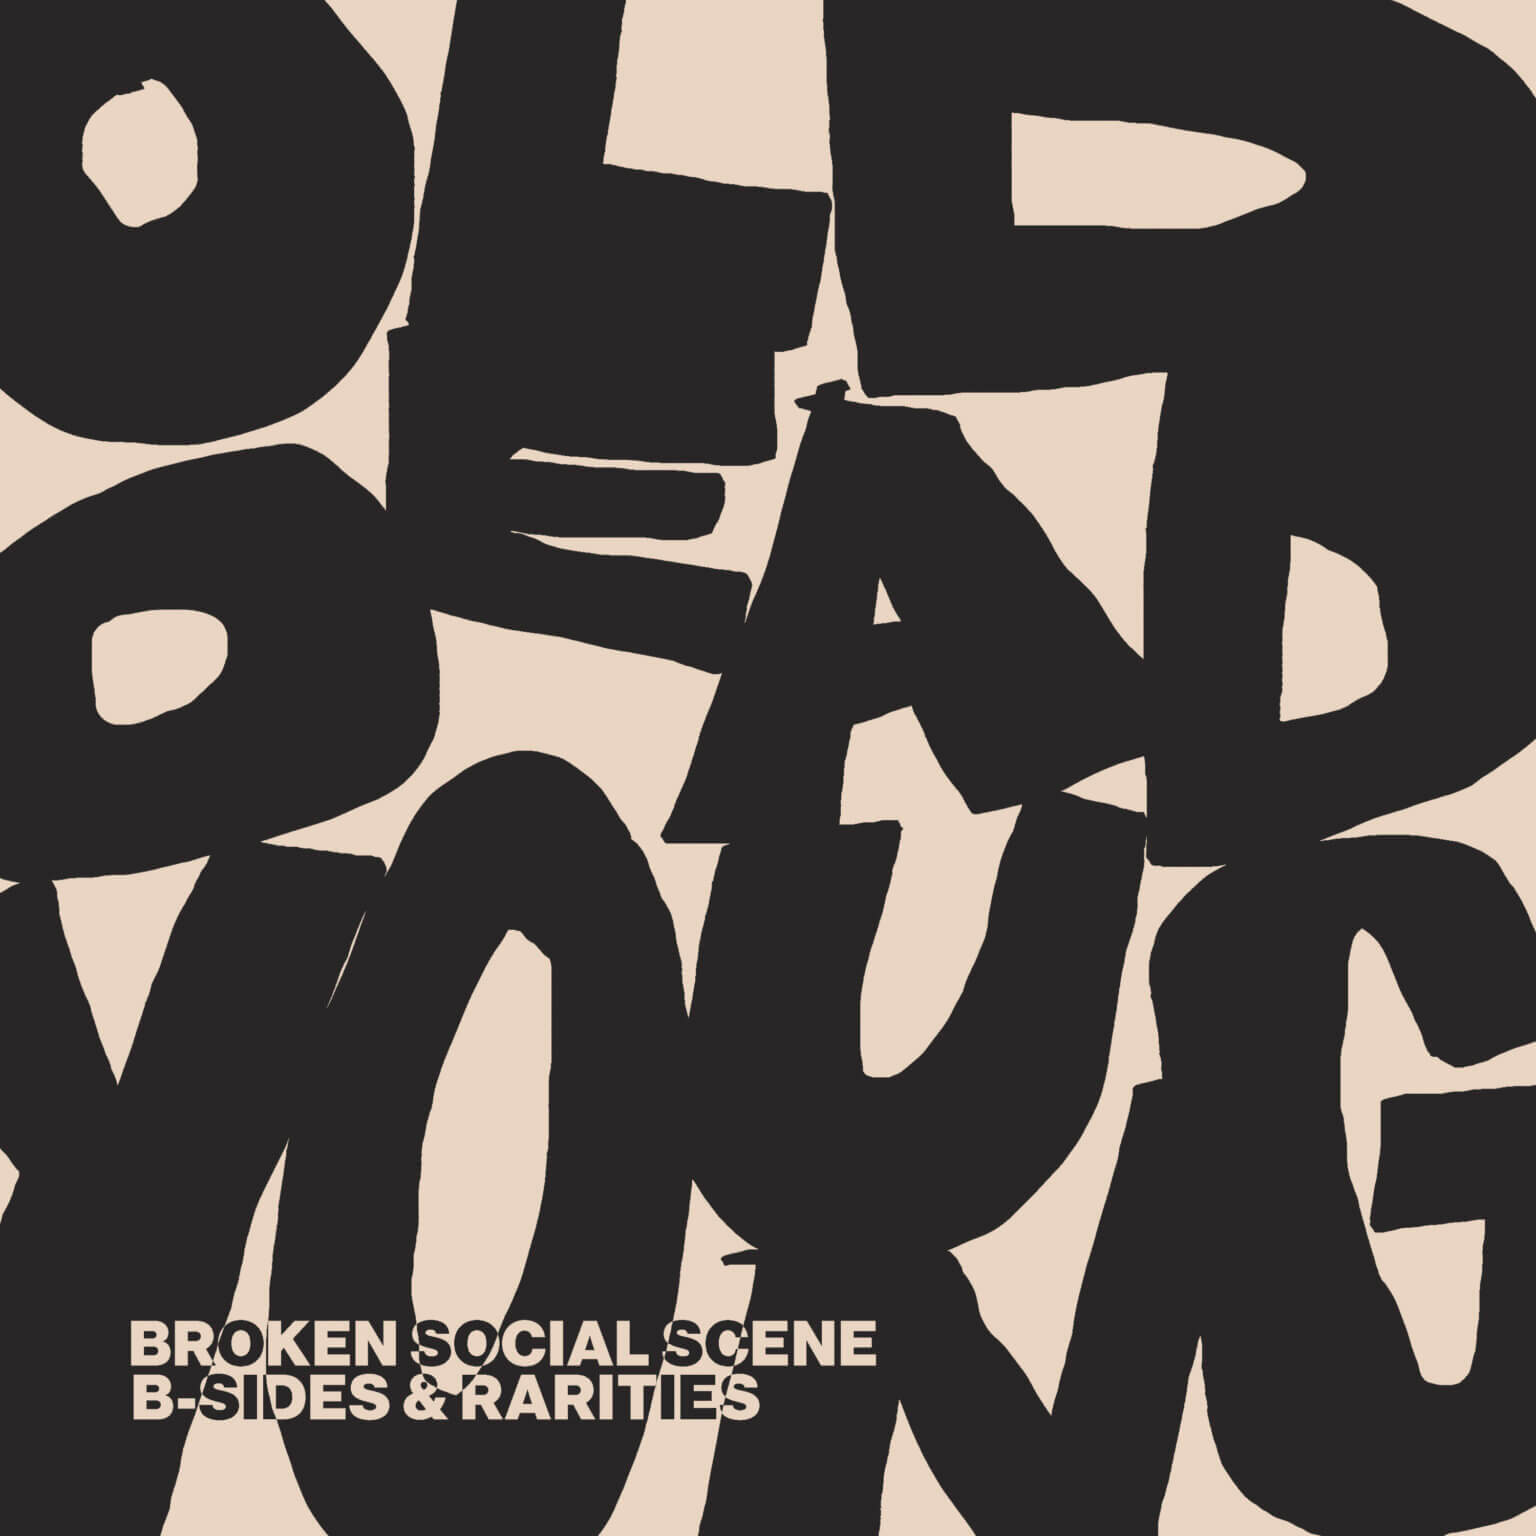 Broken Social Scene have announced their new album, Old Dead Young: B-Sides & Rarities, which will drop on January 14, 2022 via Arts & Crafts